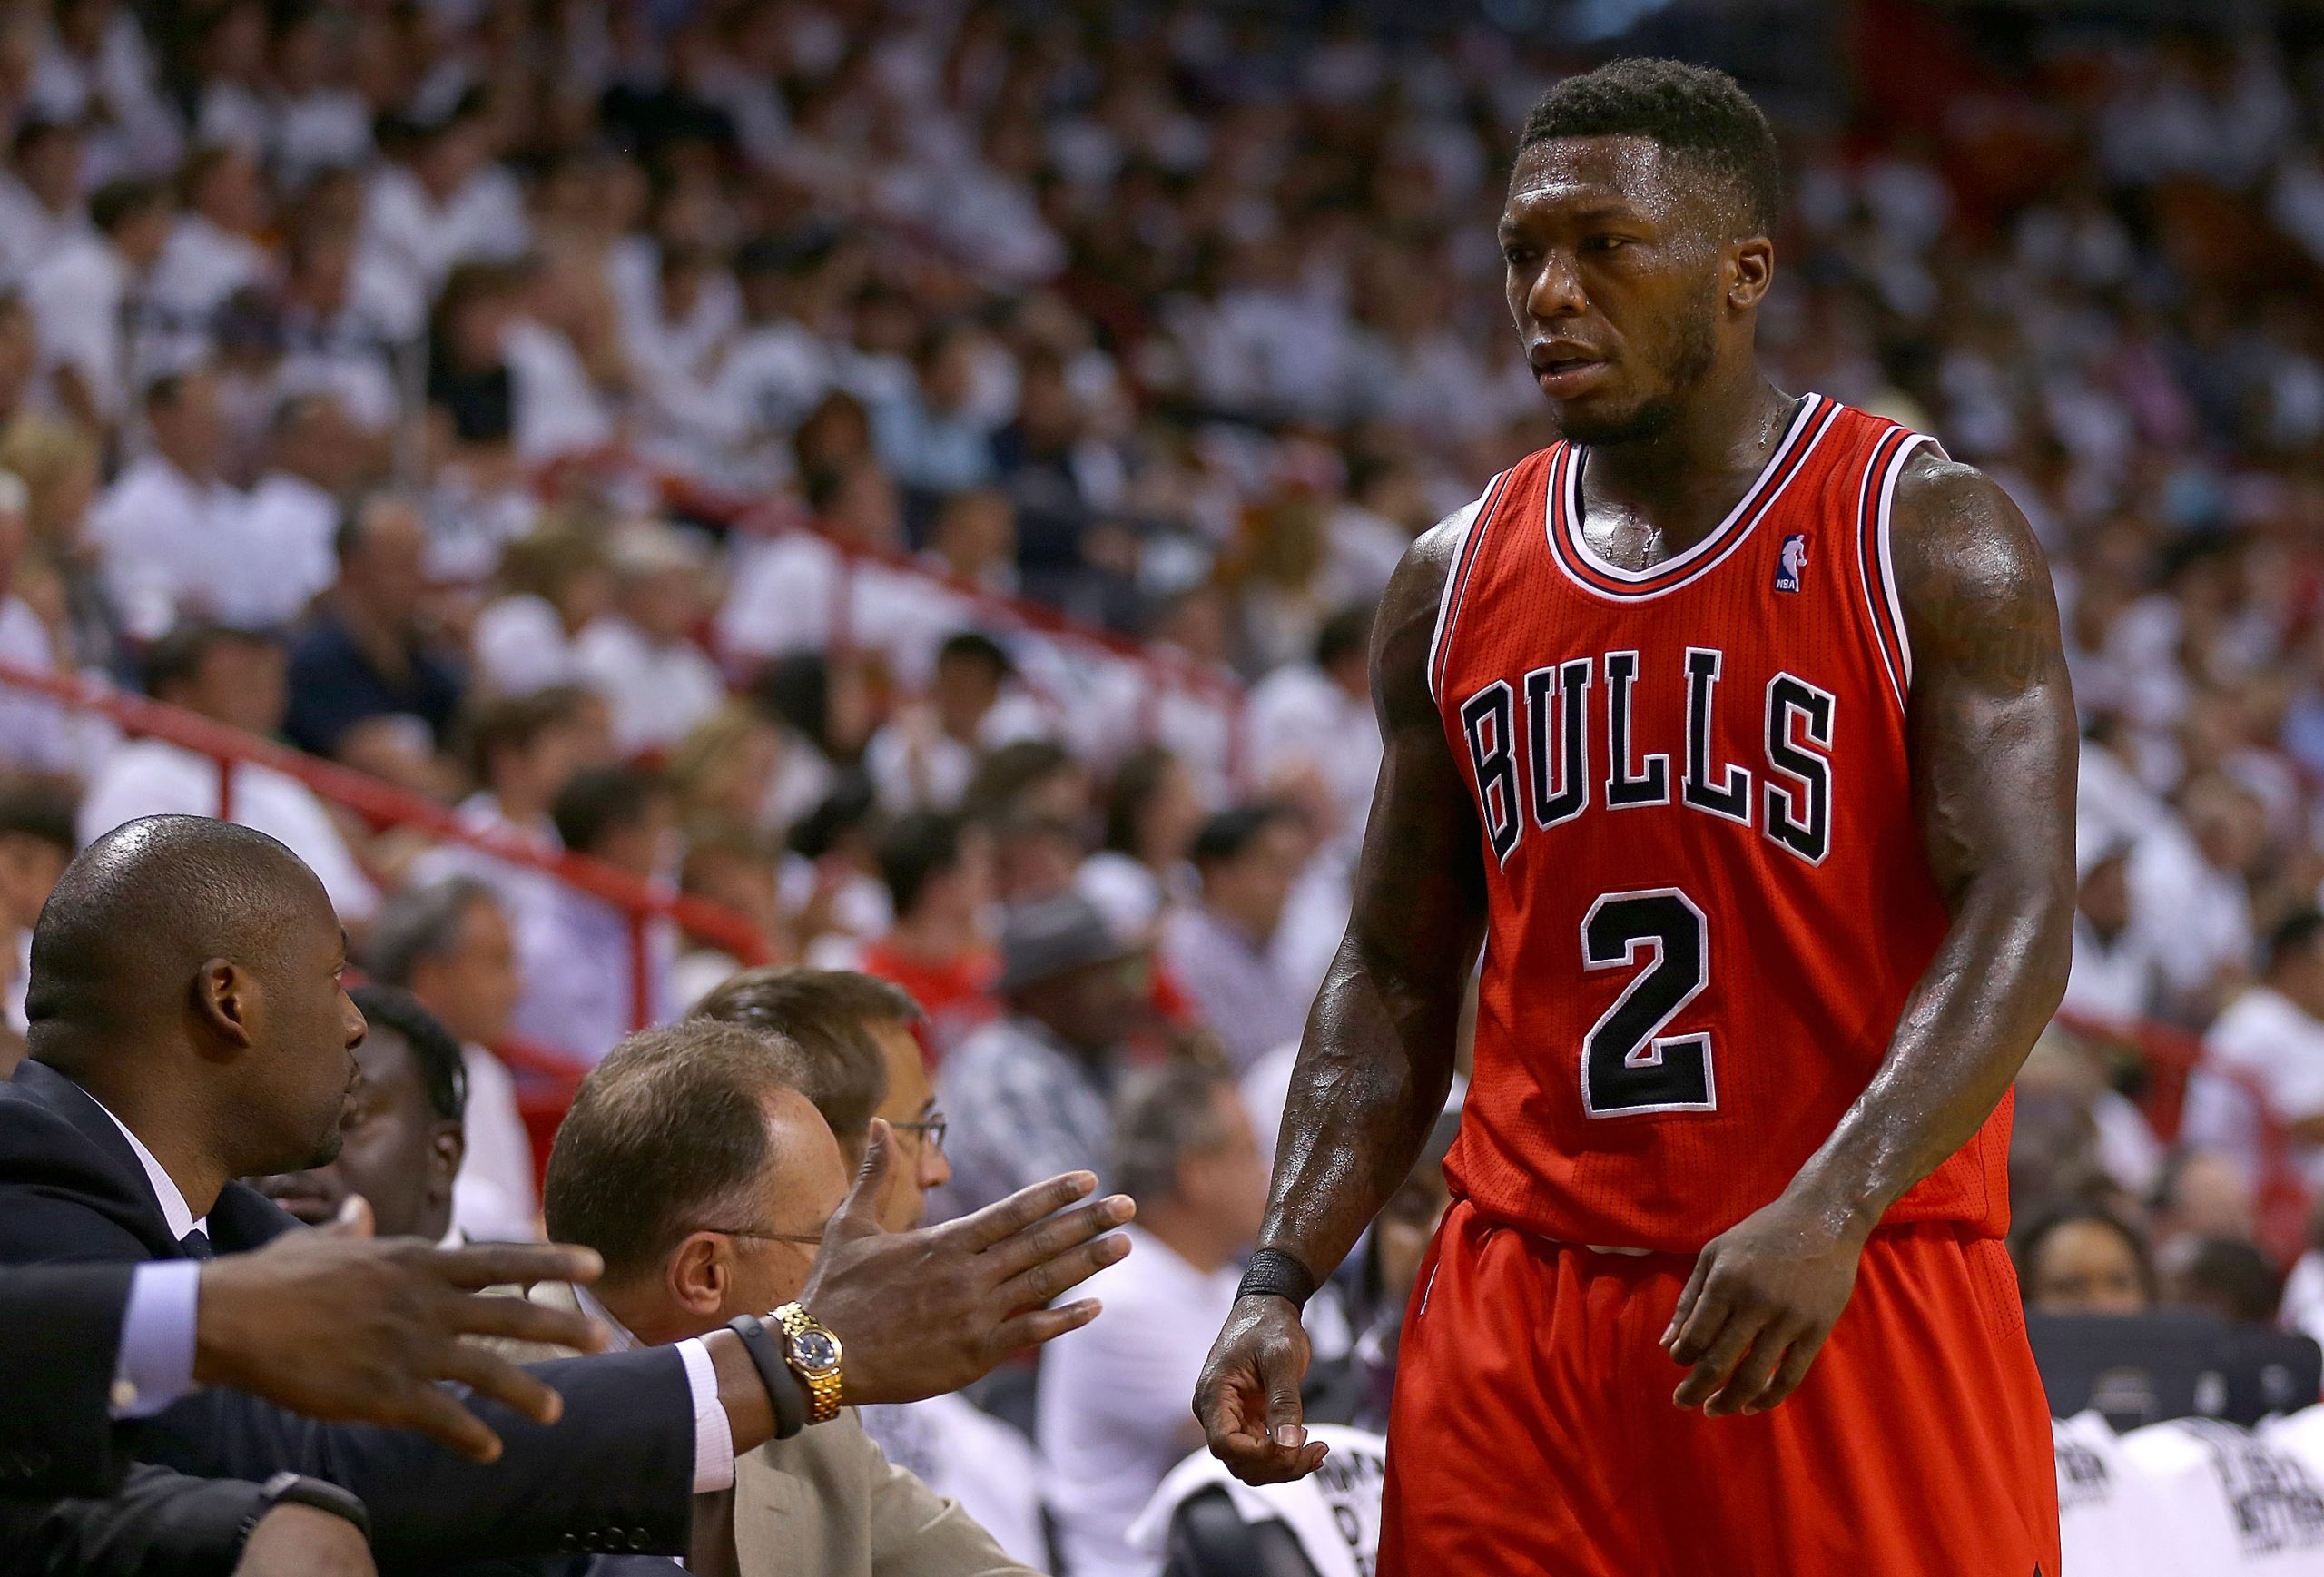 Nate Robinson 2021 - Net Worth, Salary, Records, and Endorsements